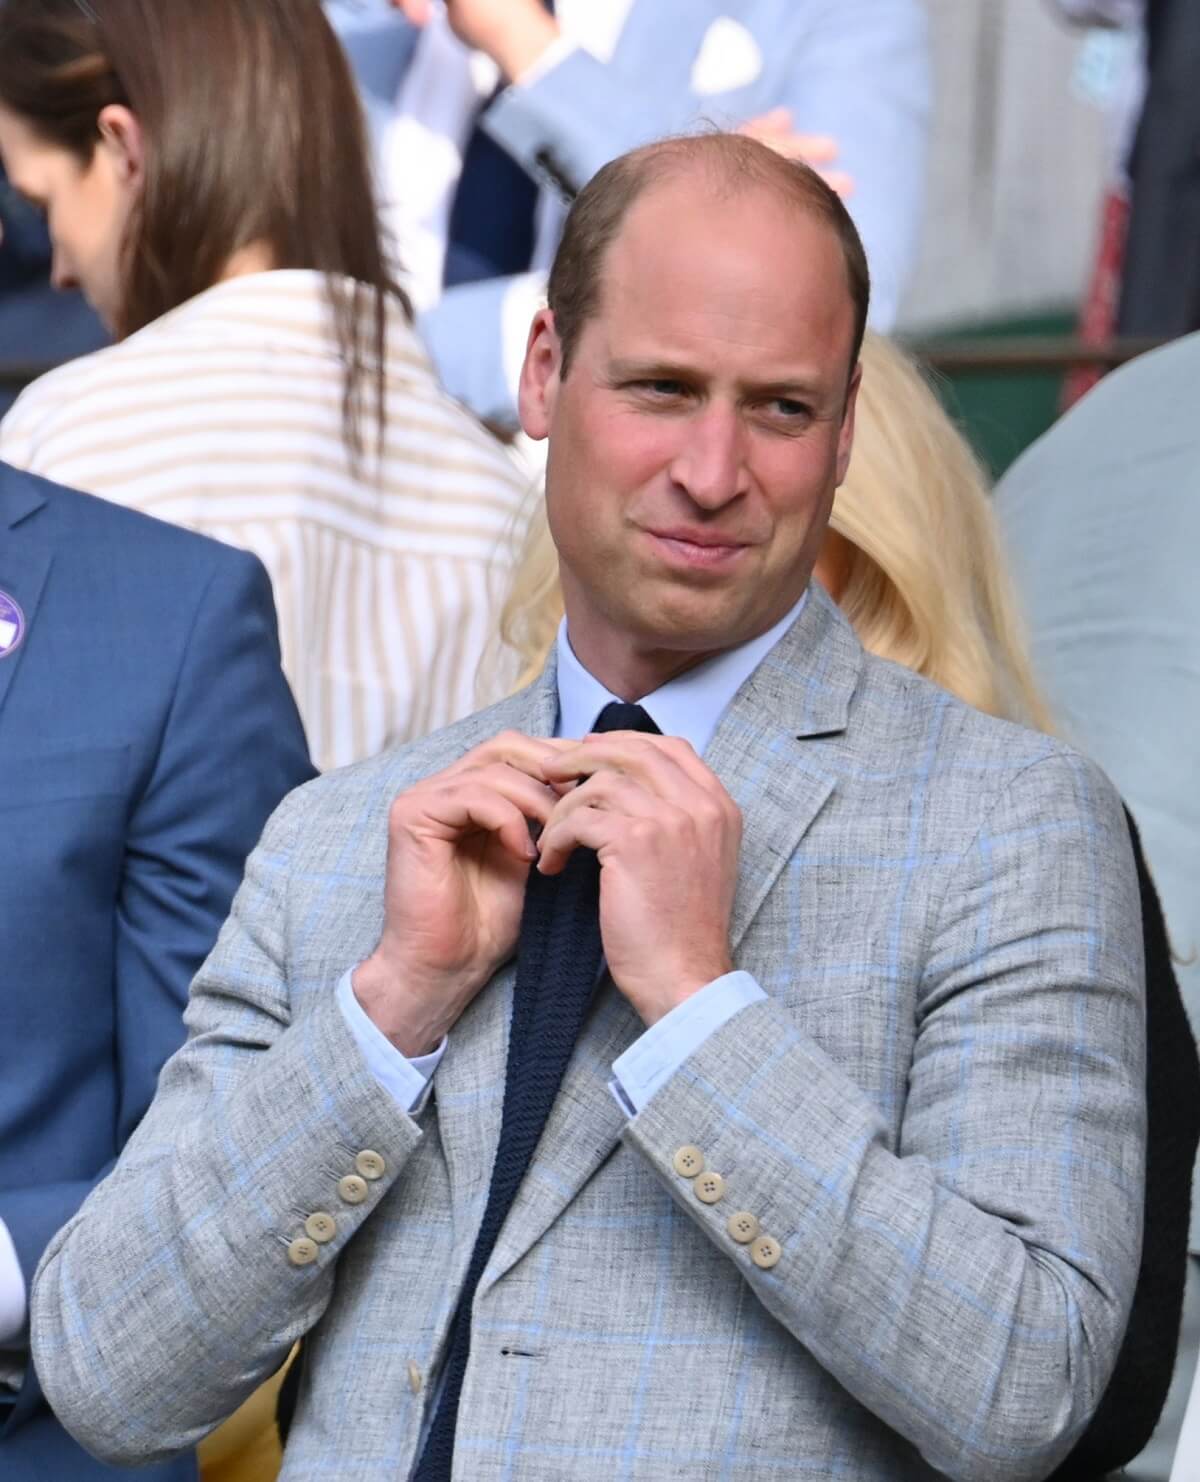 Prince William looks on as Carlos Alcaraz is presented with the Wimbledon gentlemen's singles trophy